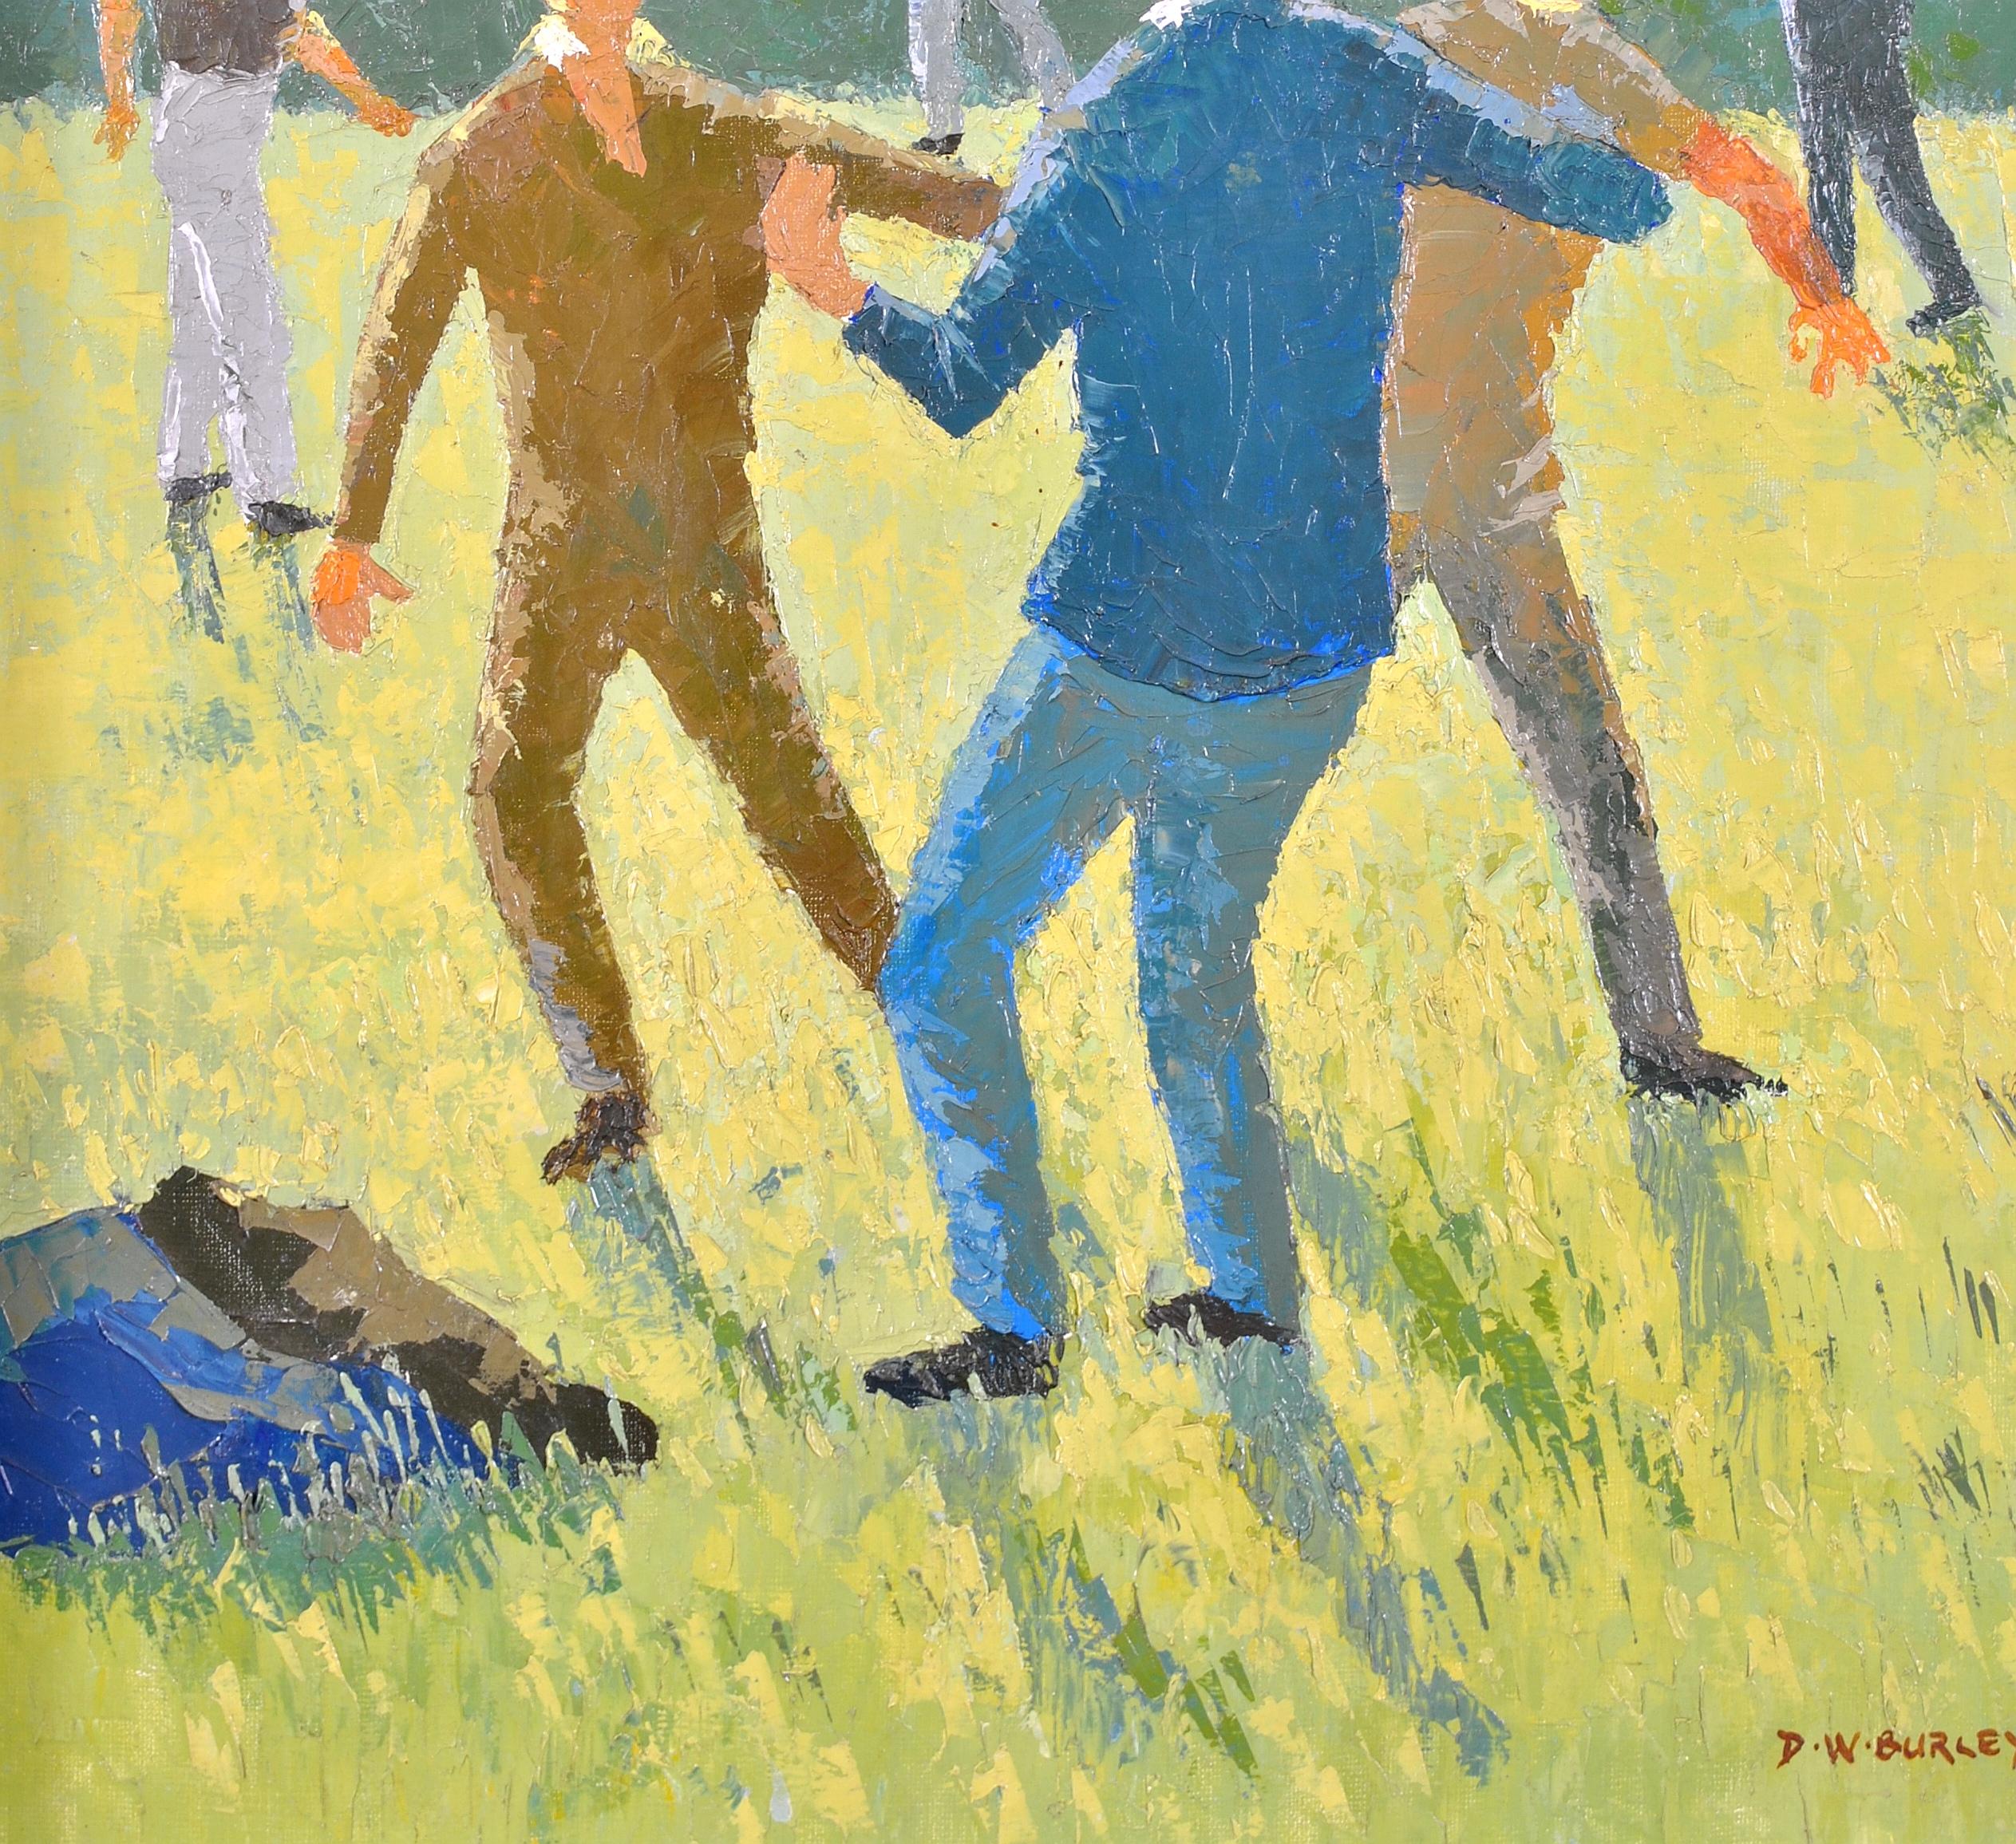 A beautiful oil on canvas which has been laid on board by the English artist David William Burley depicting a group of friends playing football in a park. Signed lower right and presented in a silver frame.

Born Greenwich, Burley trained at